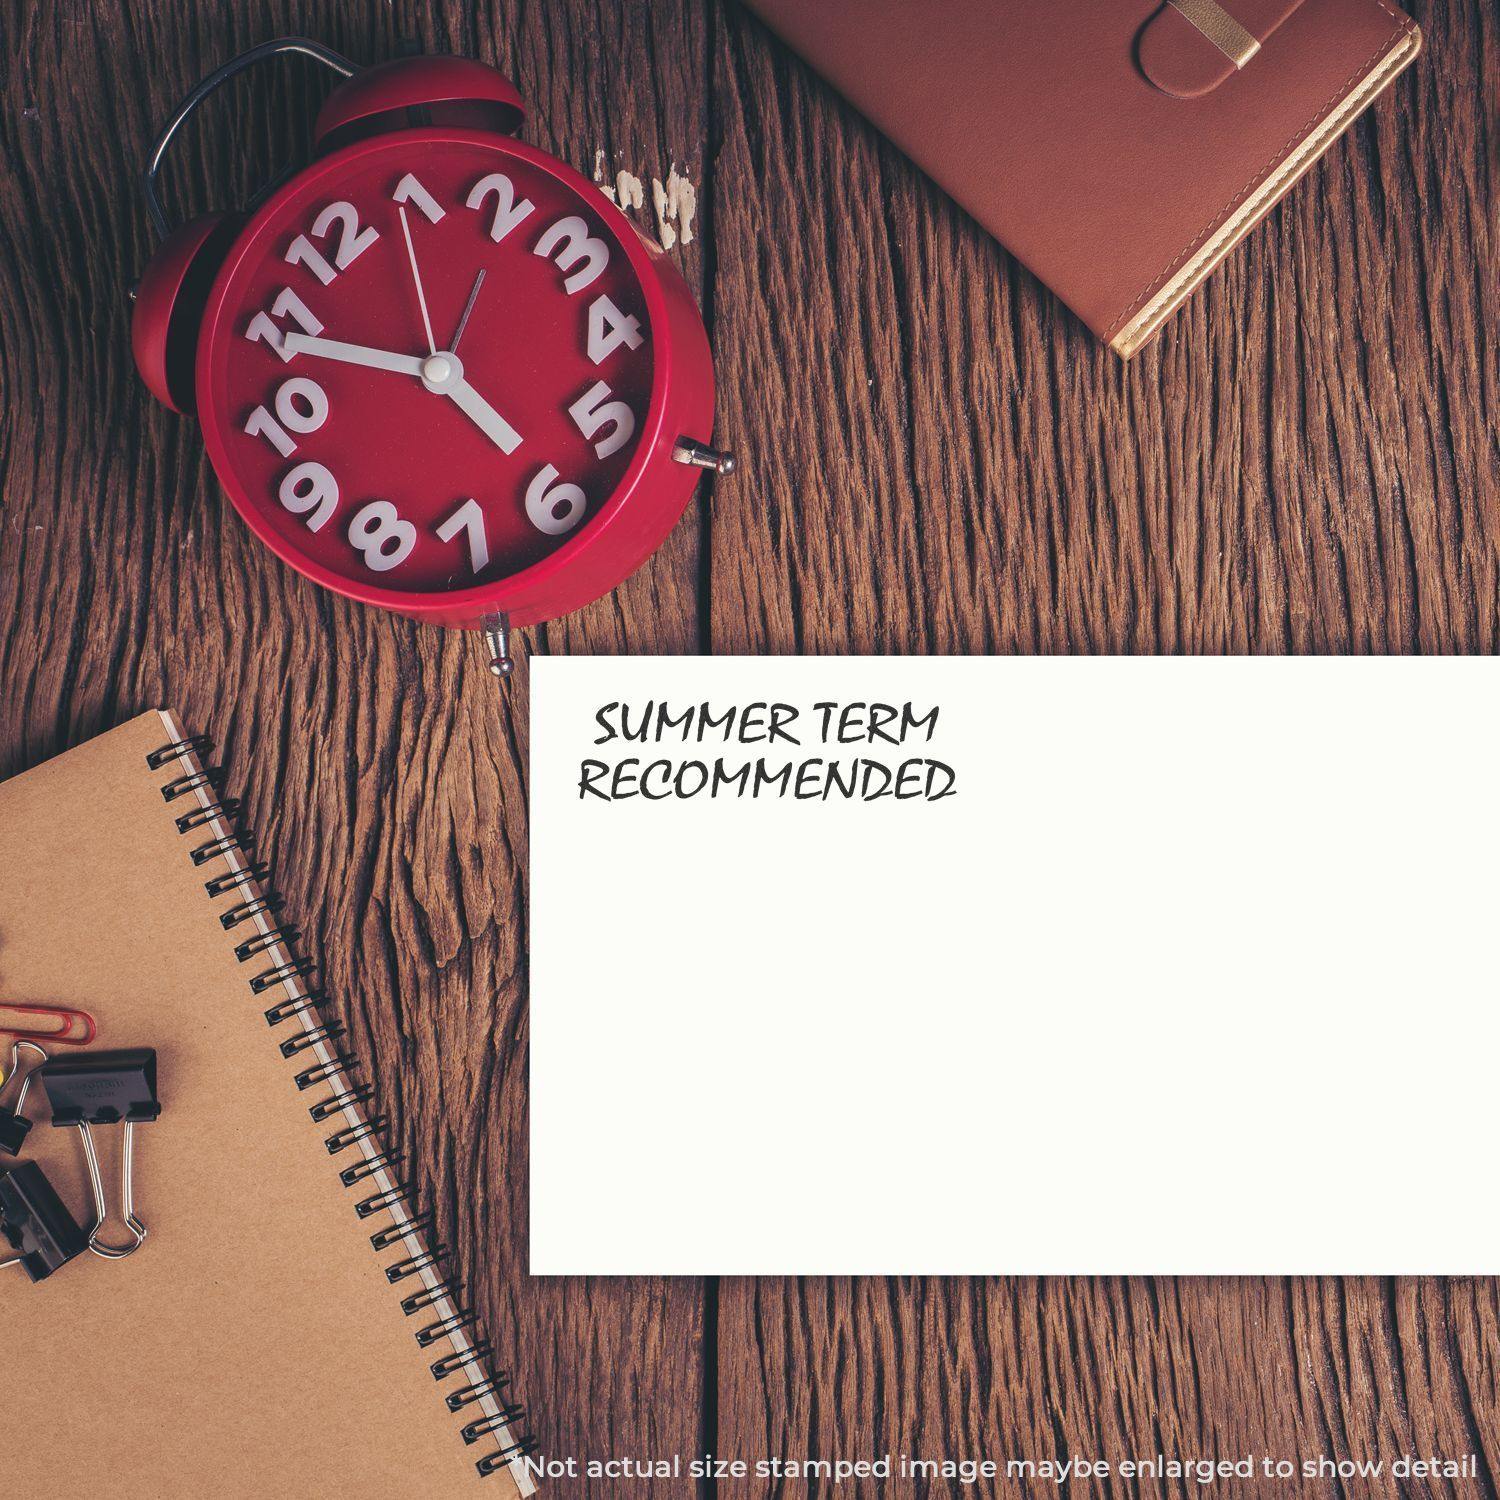 A stock office rubber stamp with a stamped image showing how the text "SUMMER TERM RECOMMENDED" in a large font is displayed after stamping.